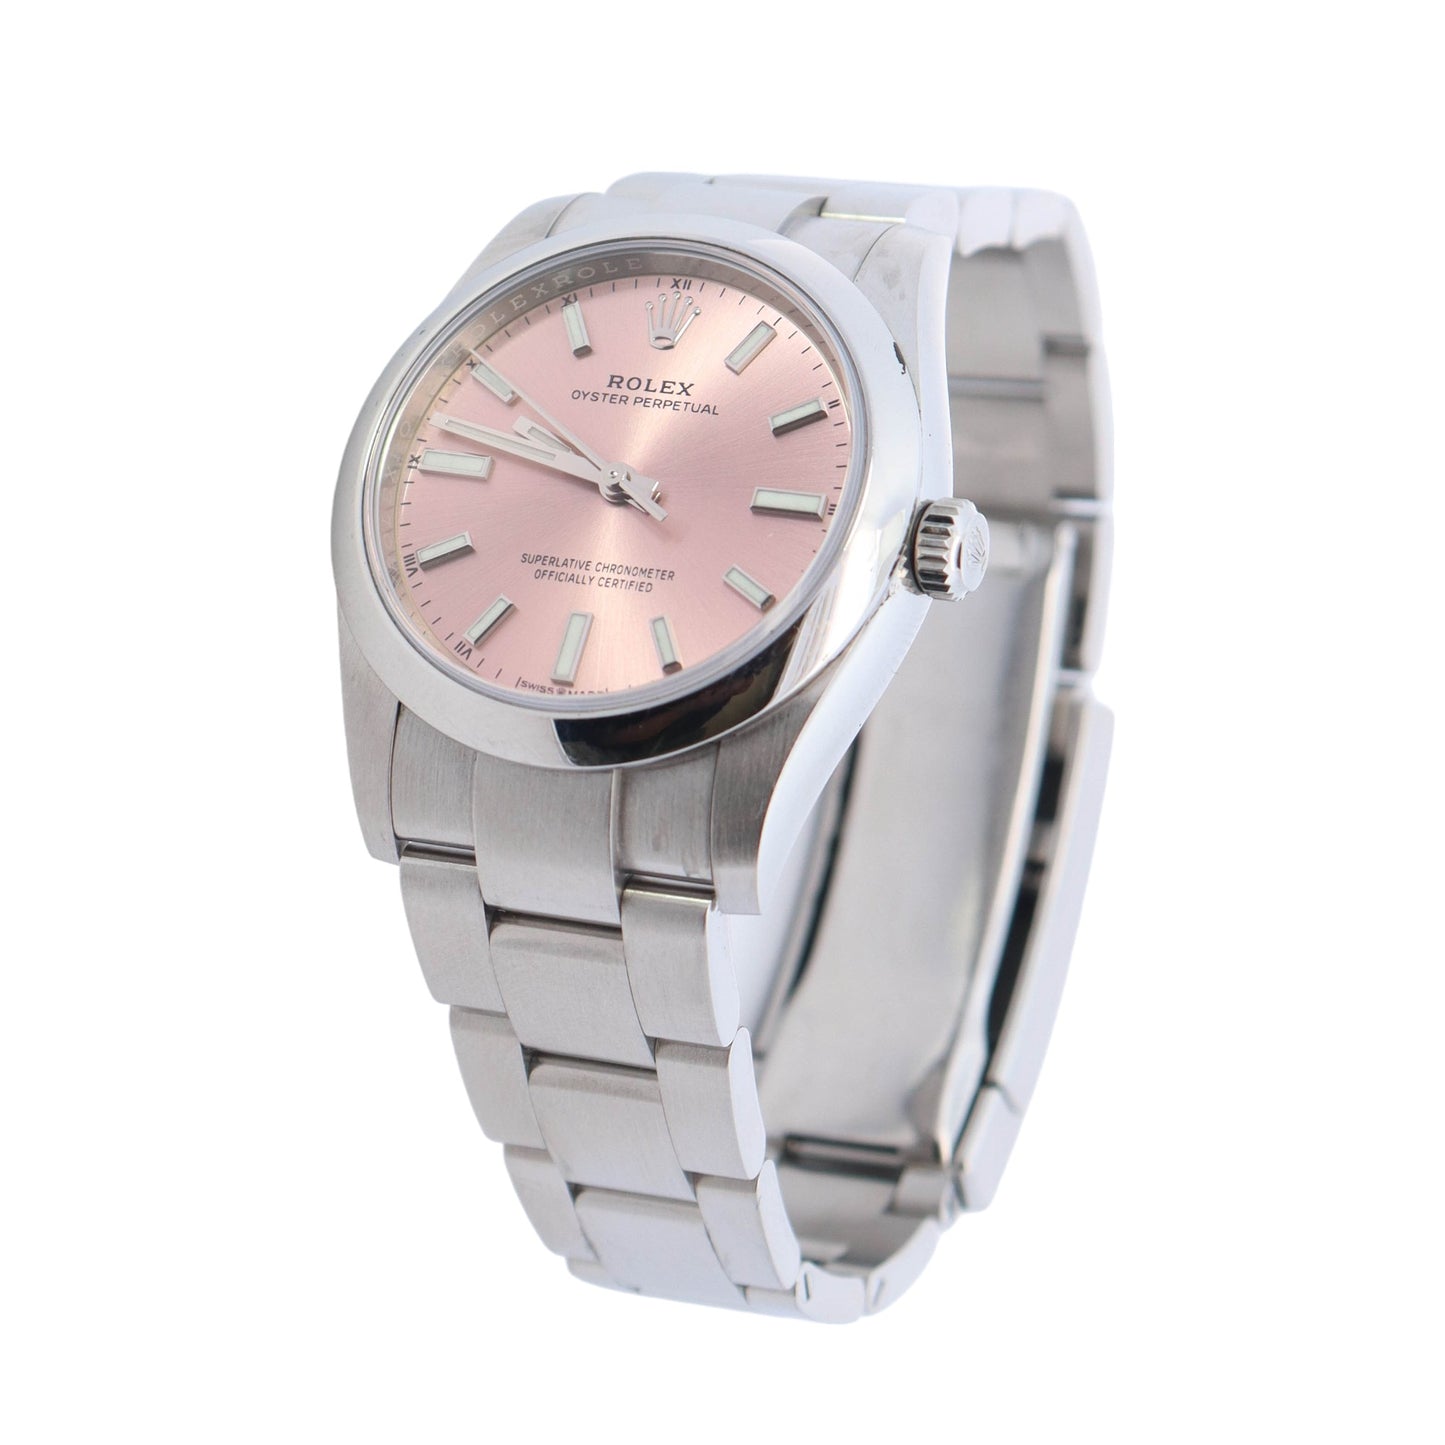 Rolex Datejust Stainless Steel 34mm Pink Stick Dial Watch Reference #: 124200